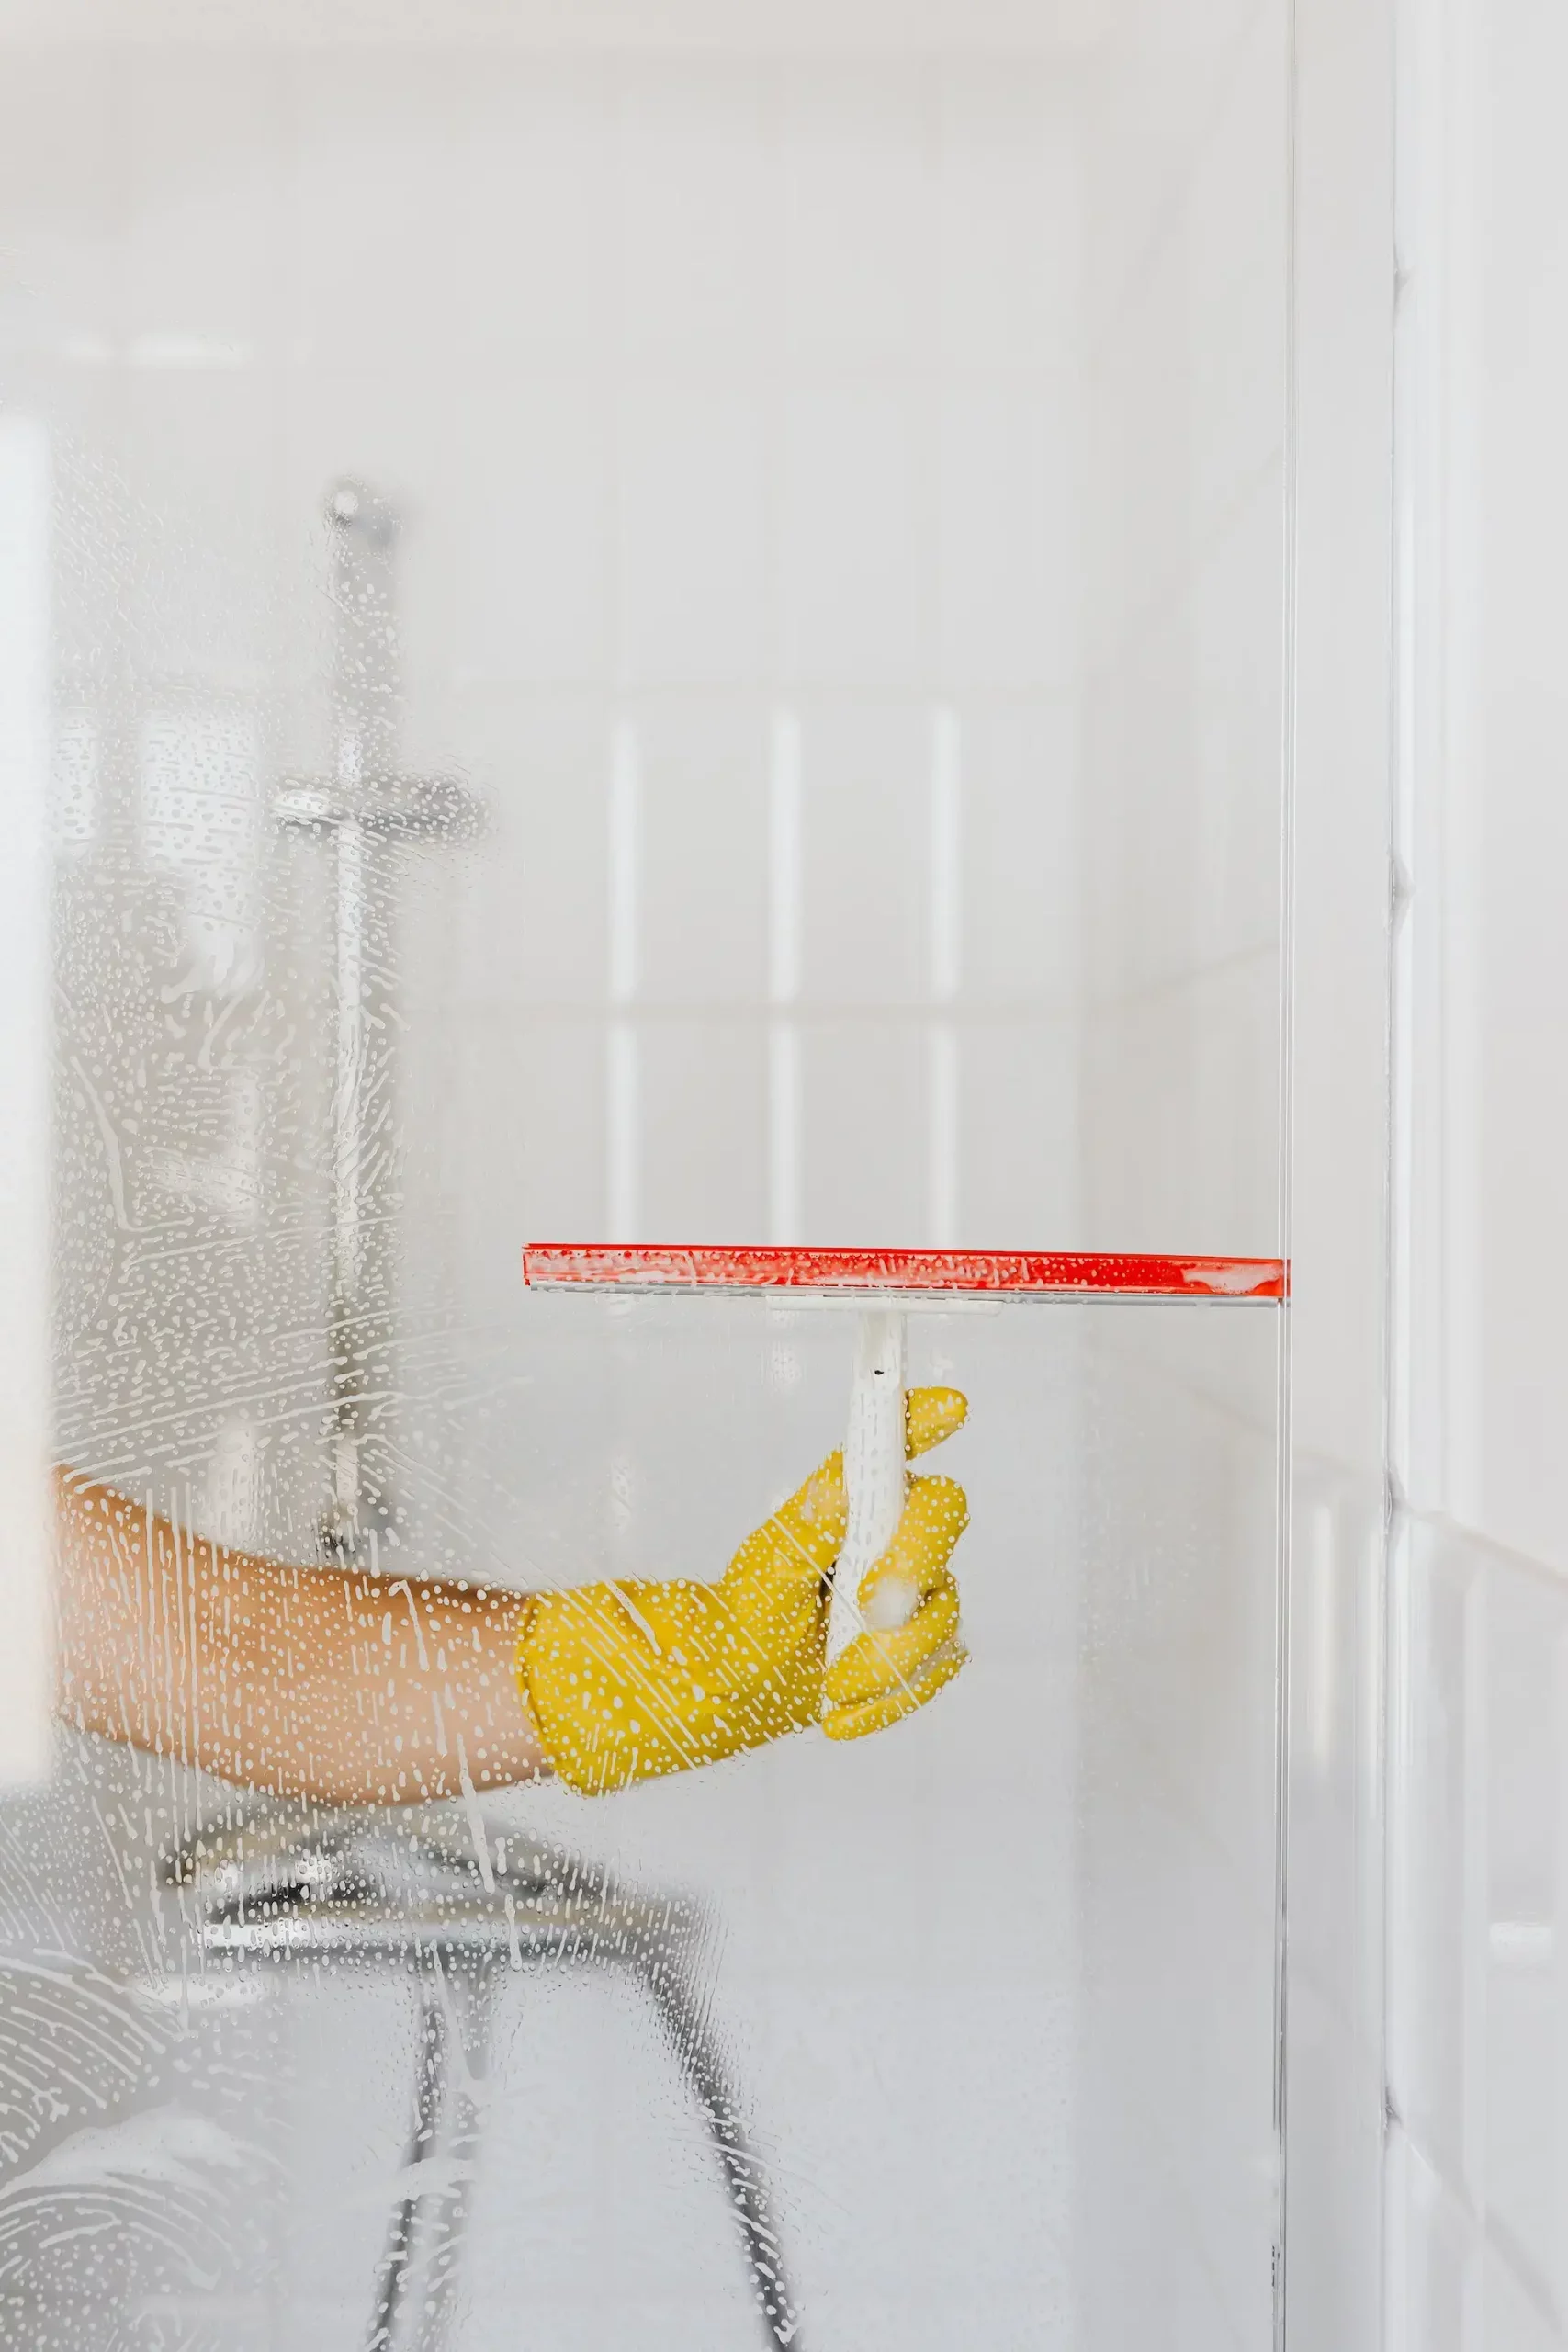 How to Clean Glass Shower Doors  Cleaning shower glass, Cleaning glass shower  doors, Glass shower doors